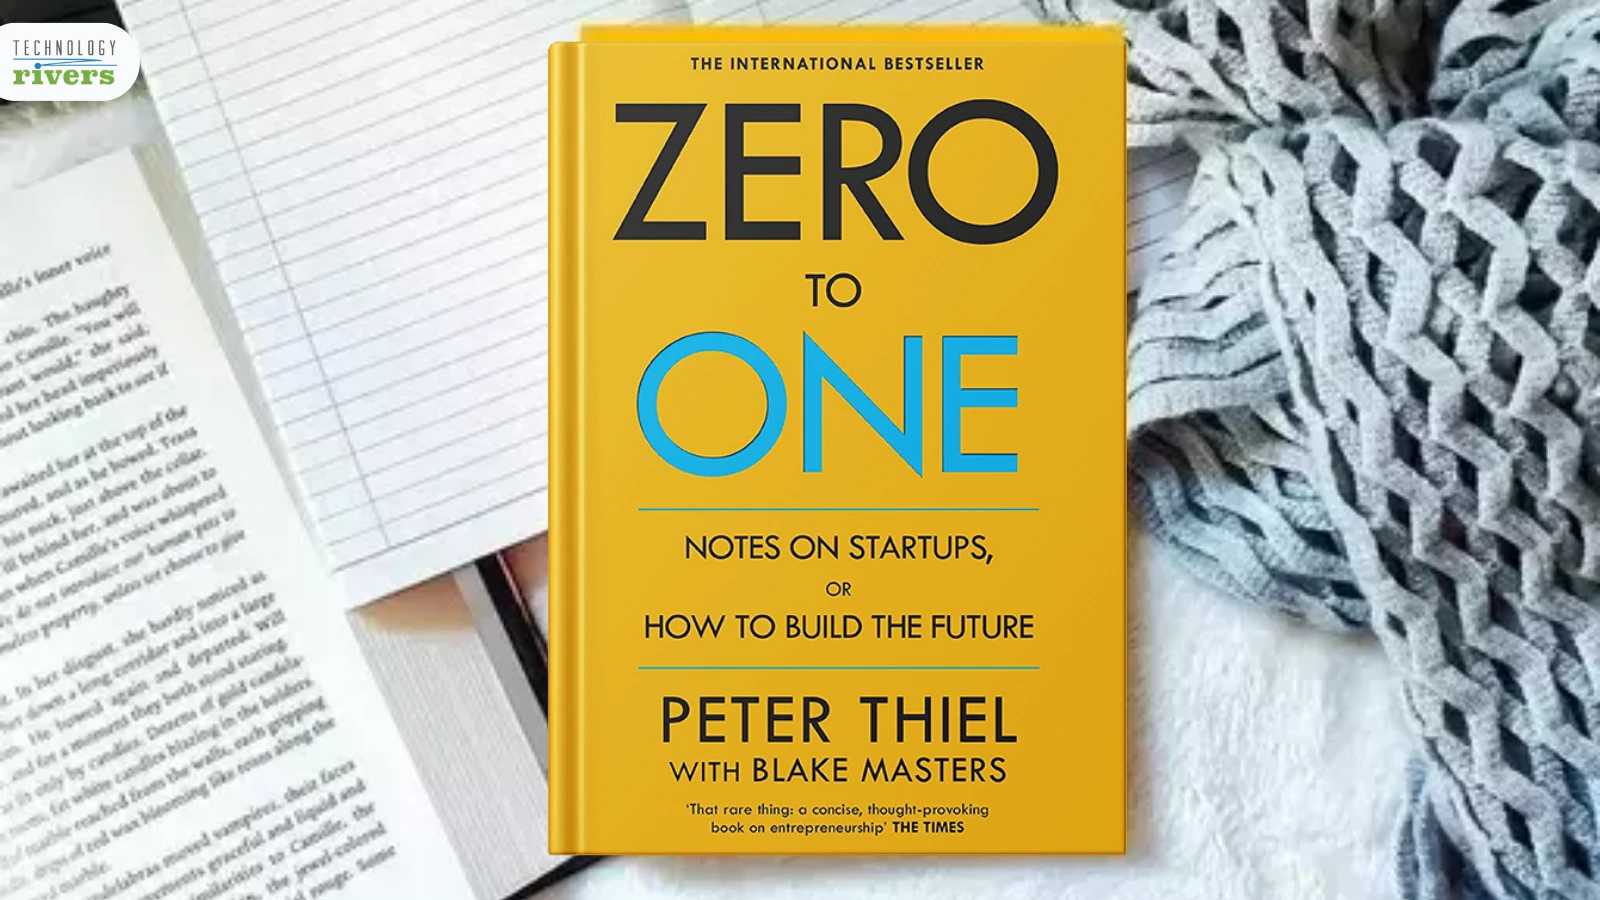 Book Review: Zero to One: Notes on Startups, or How to Build the Future